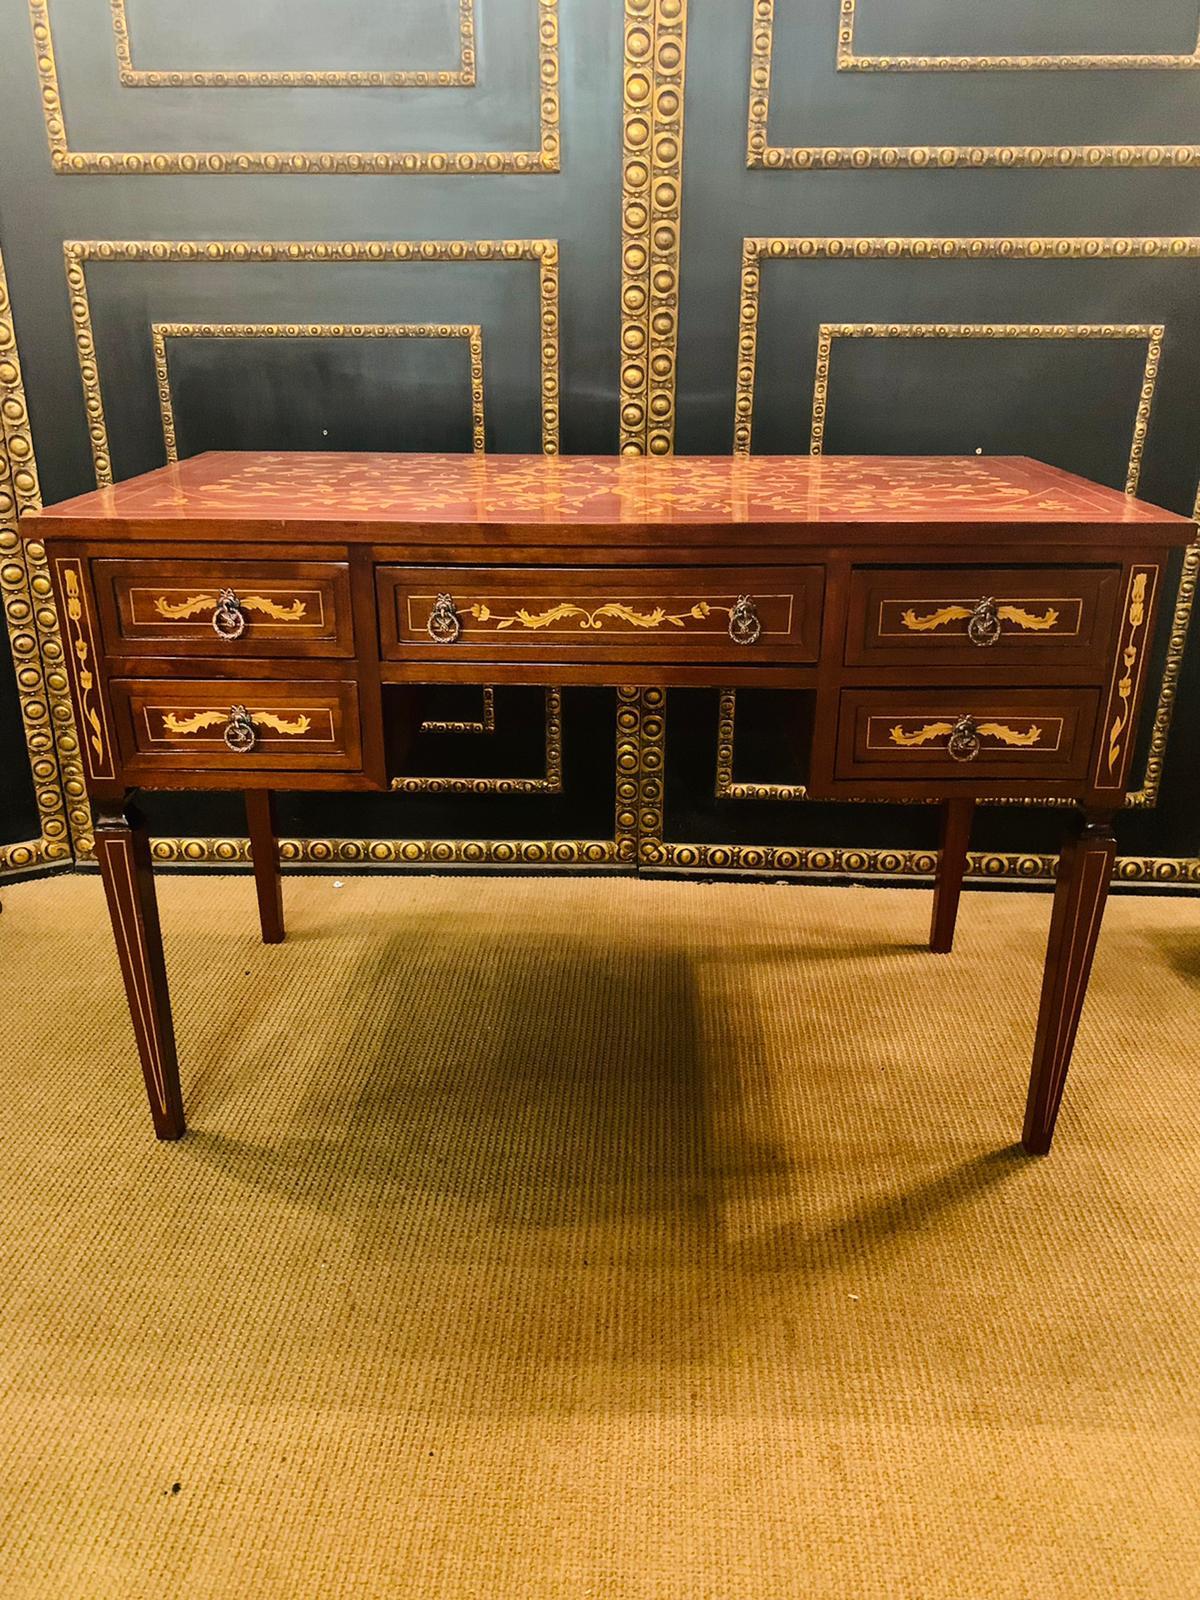 Wood 20th Century Classic Desk in the antique Style of Classicism with Inlays 